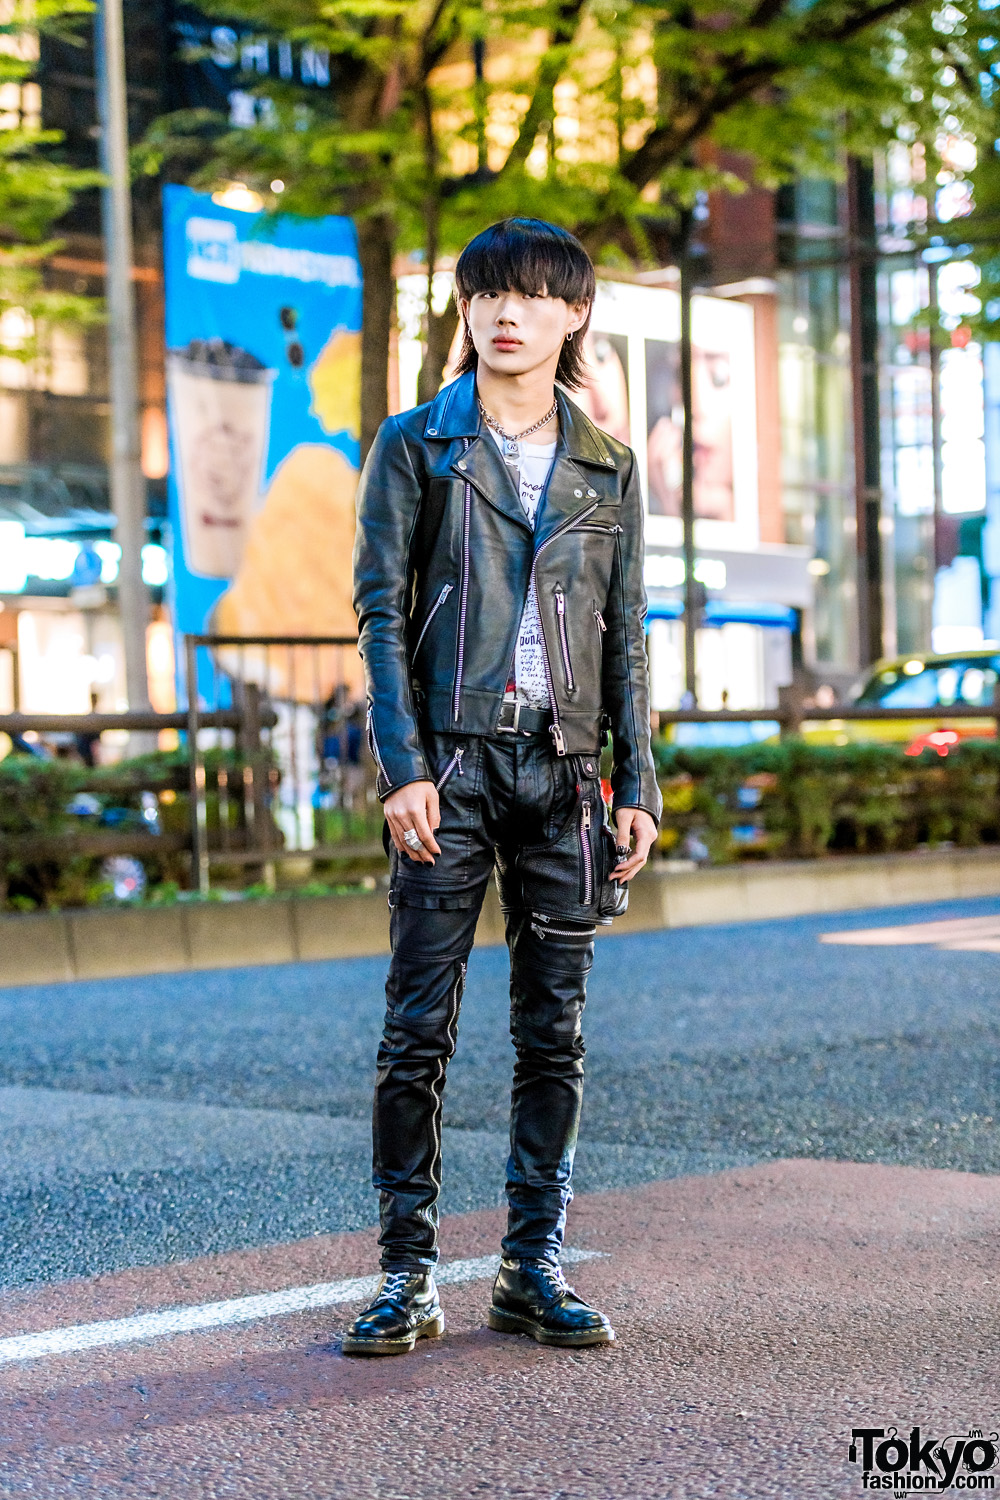 Harajuku Punk Street Style w/ 99%IS- Motorcycle Jacket, Leather Pants, Dr. Martens & Vivienne Westwood Armor Ring